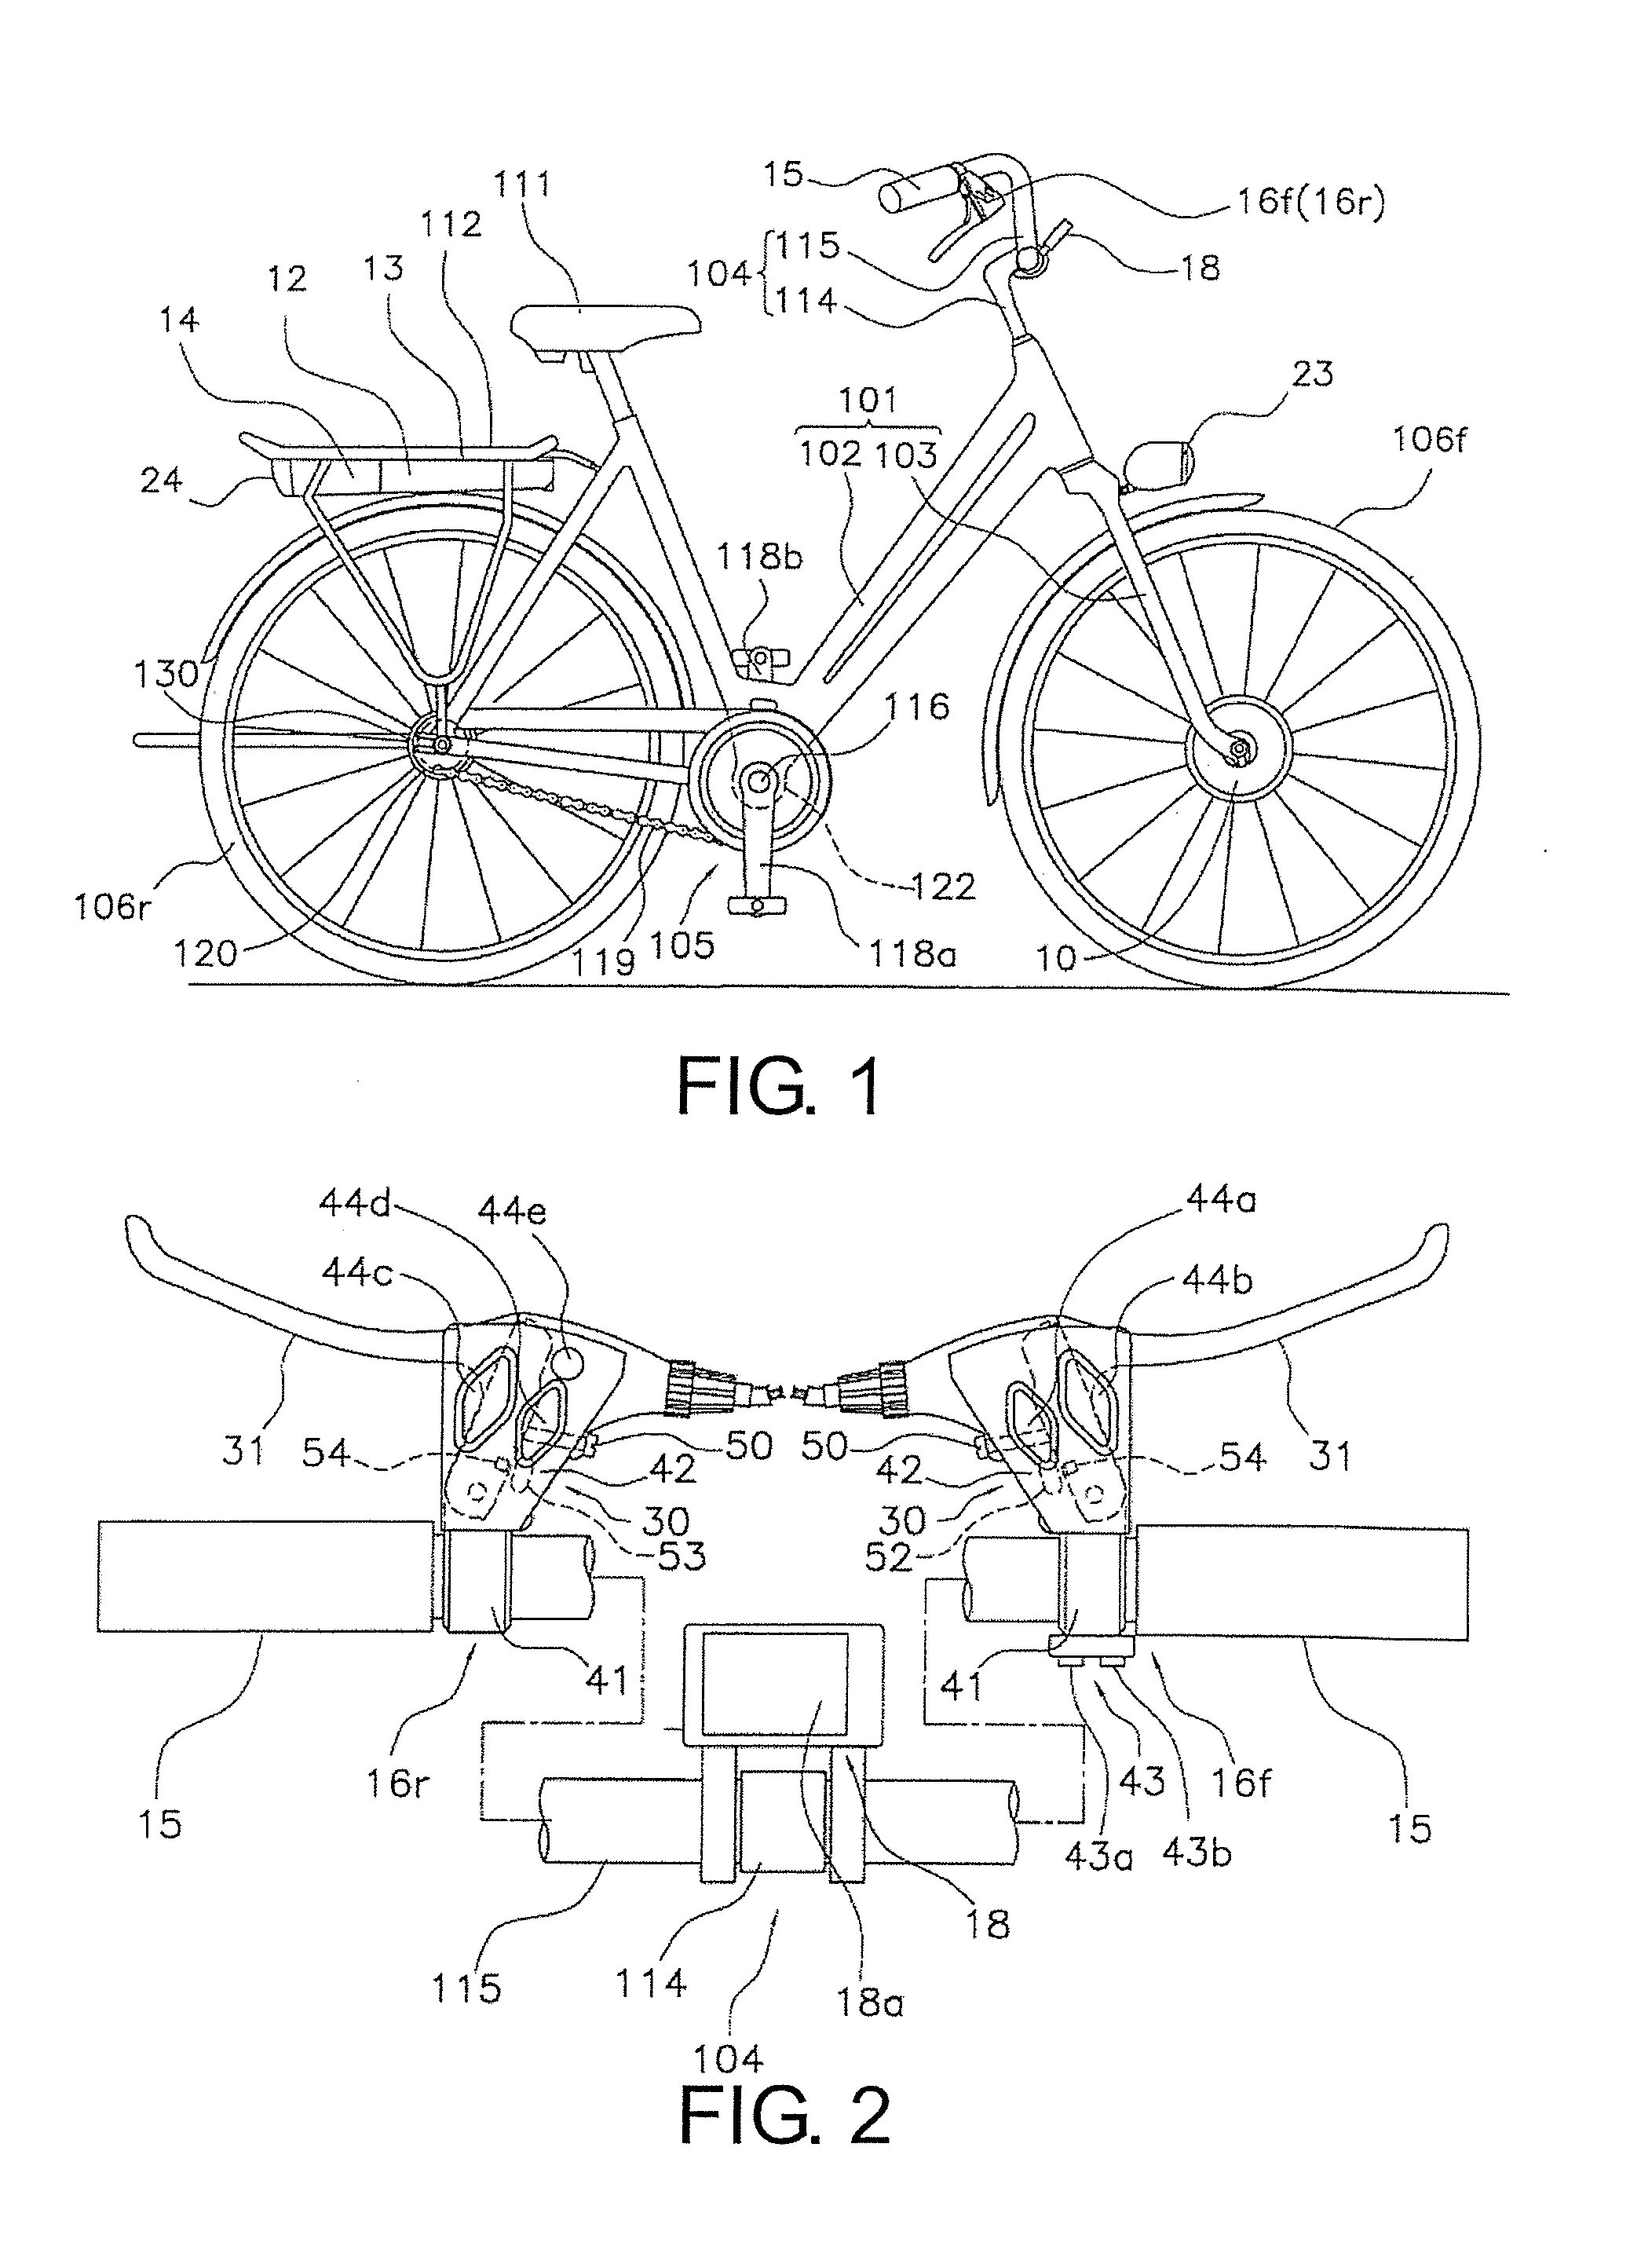 Bicycle electrical system